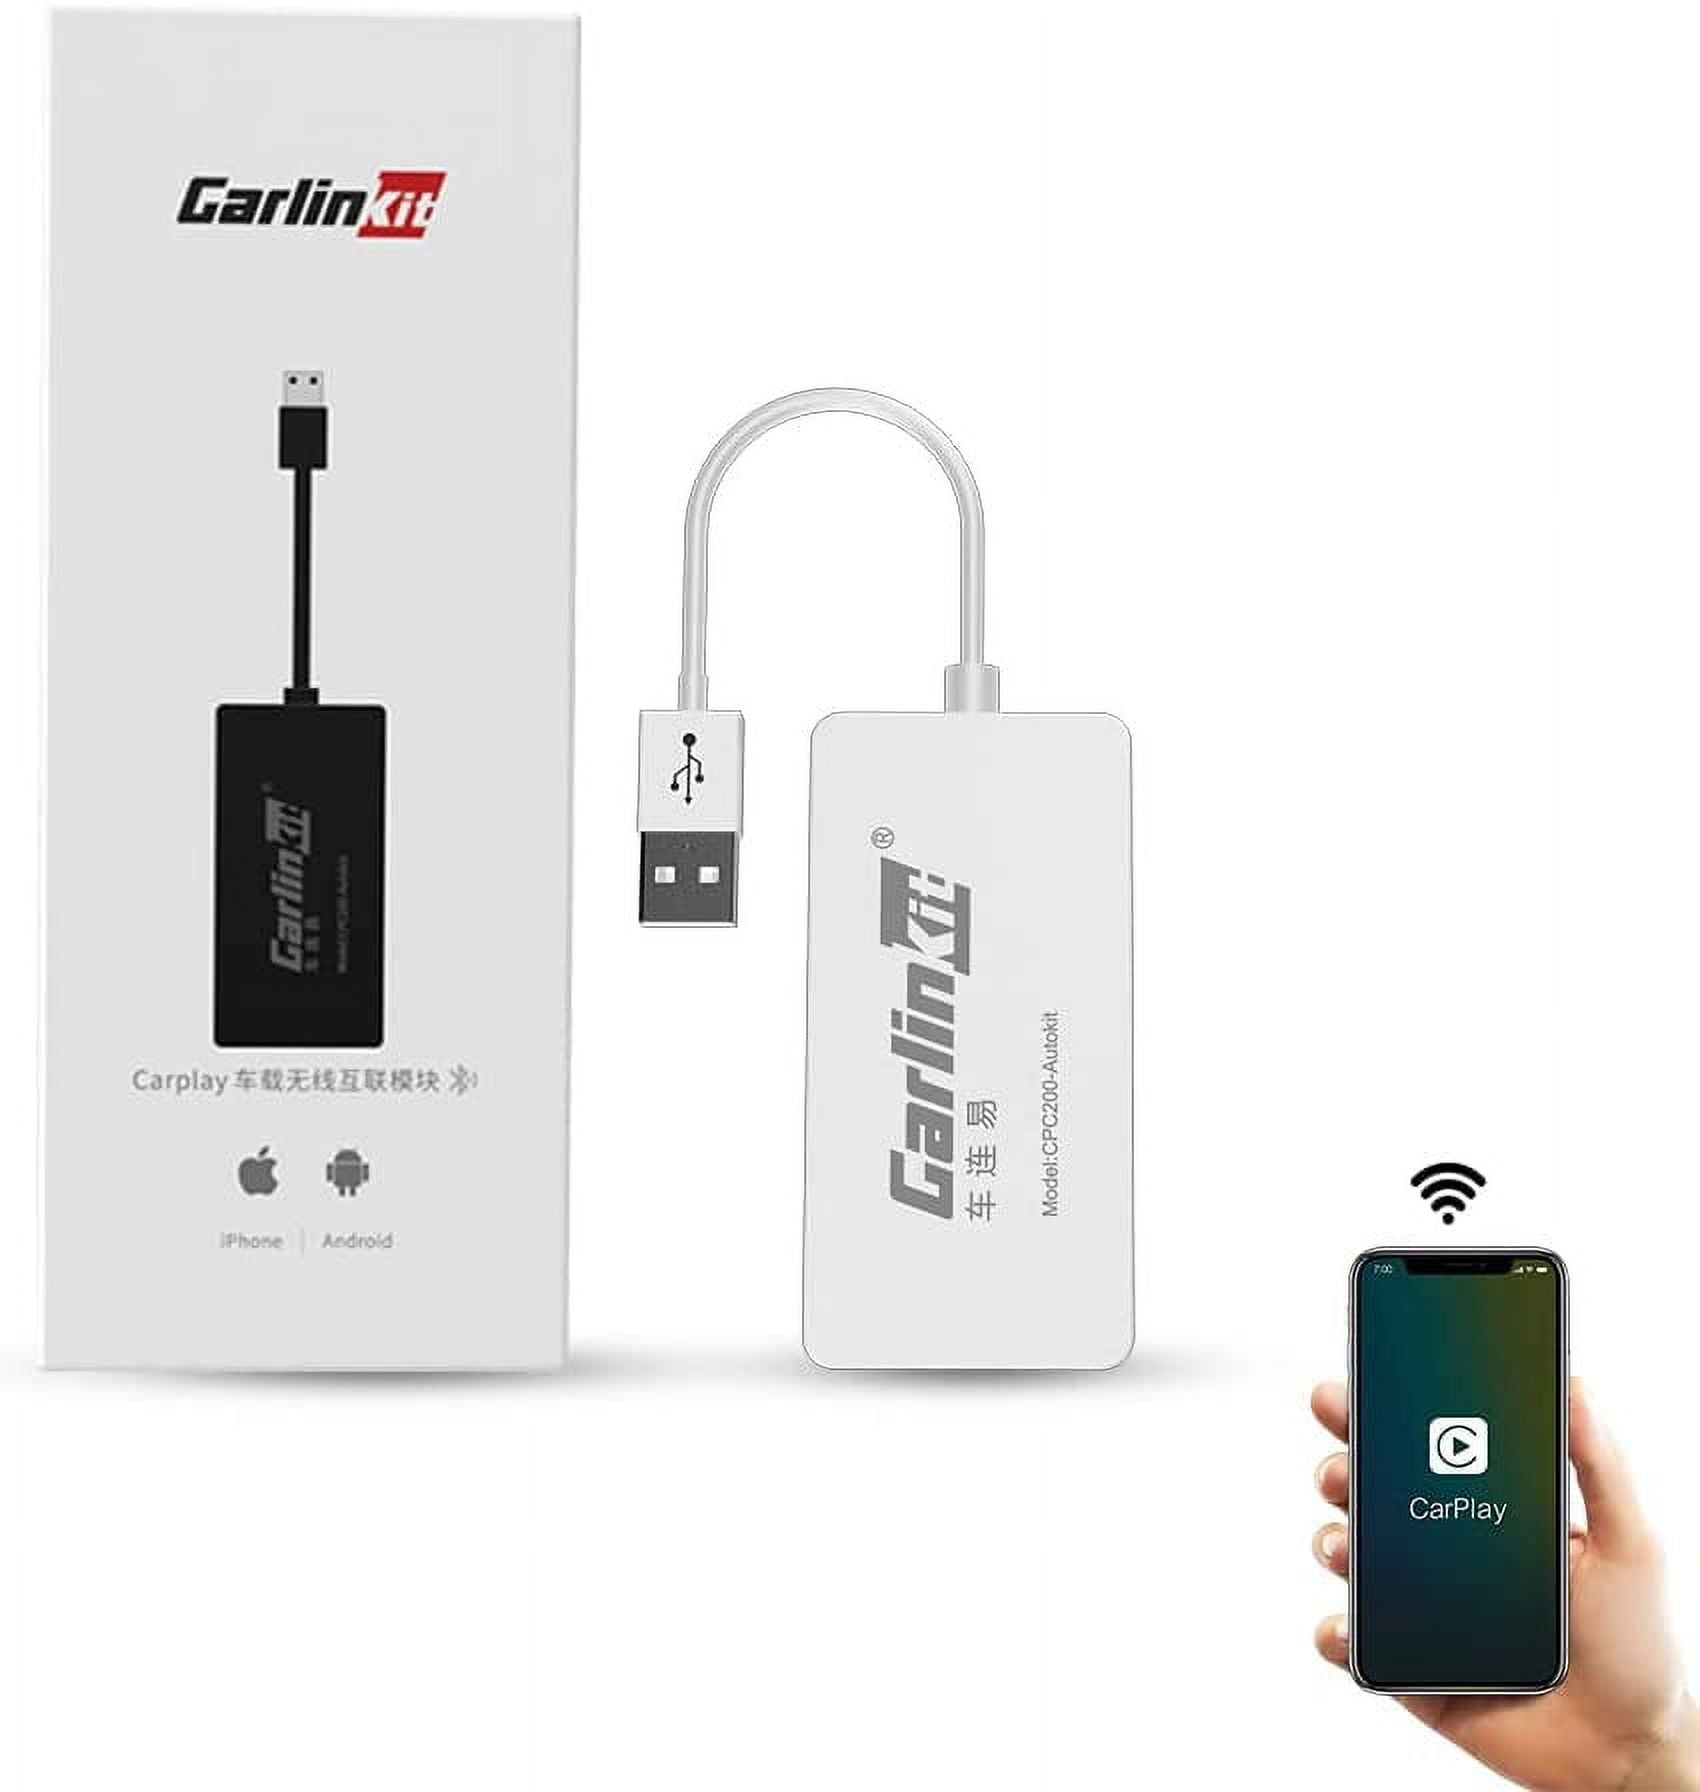  CarlinKit Wired CarPlay Dongle Android Auto for Car Radio with  Android System Version 4.4.2 and Above, Install The AutoKit App in The Car  System, Dongle Connect The Car's AutoKit App to